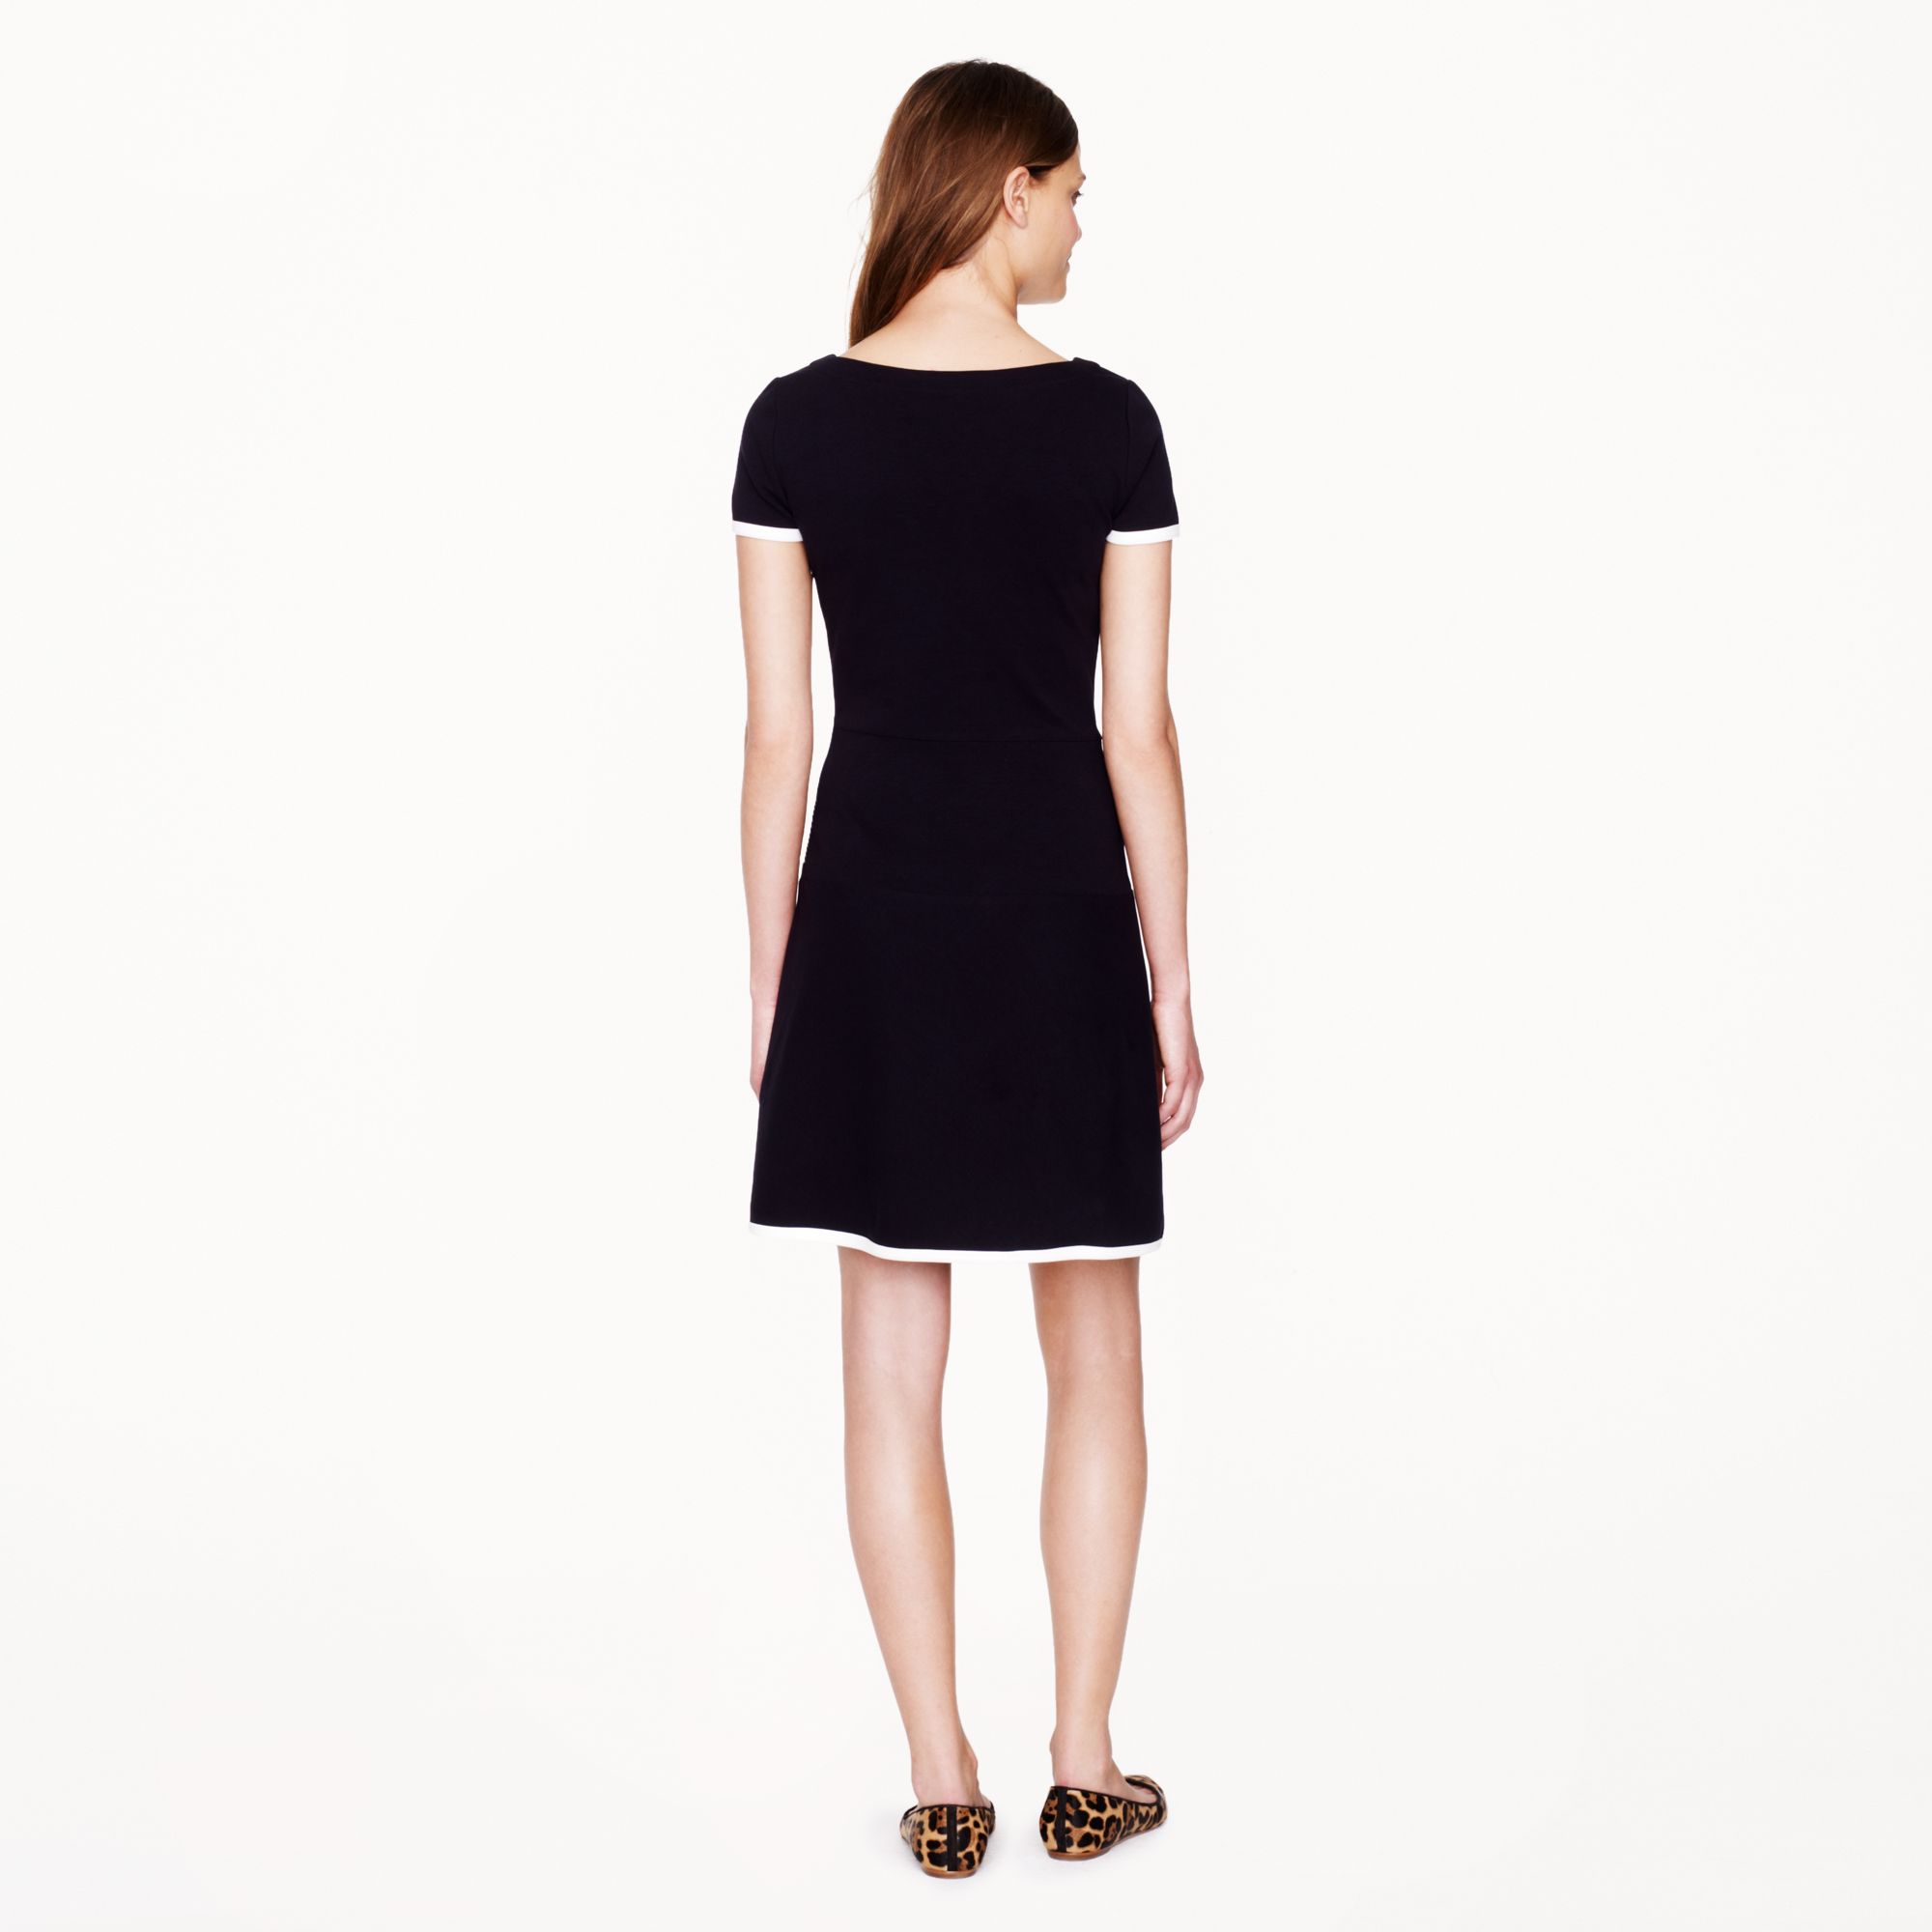 J.Crew Tipped Gamine Dress in Vintage Navy Ivory (Blue) - Lyst